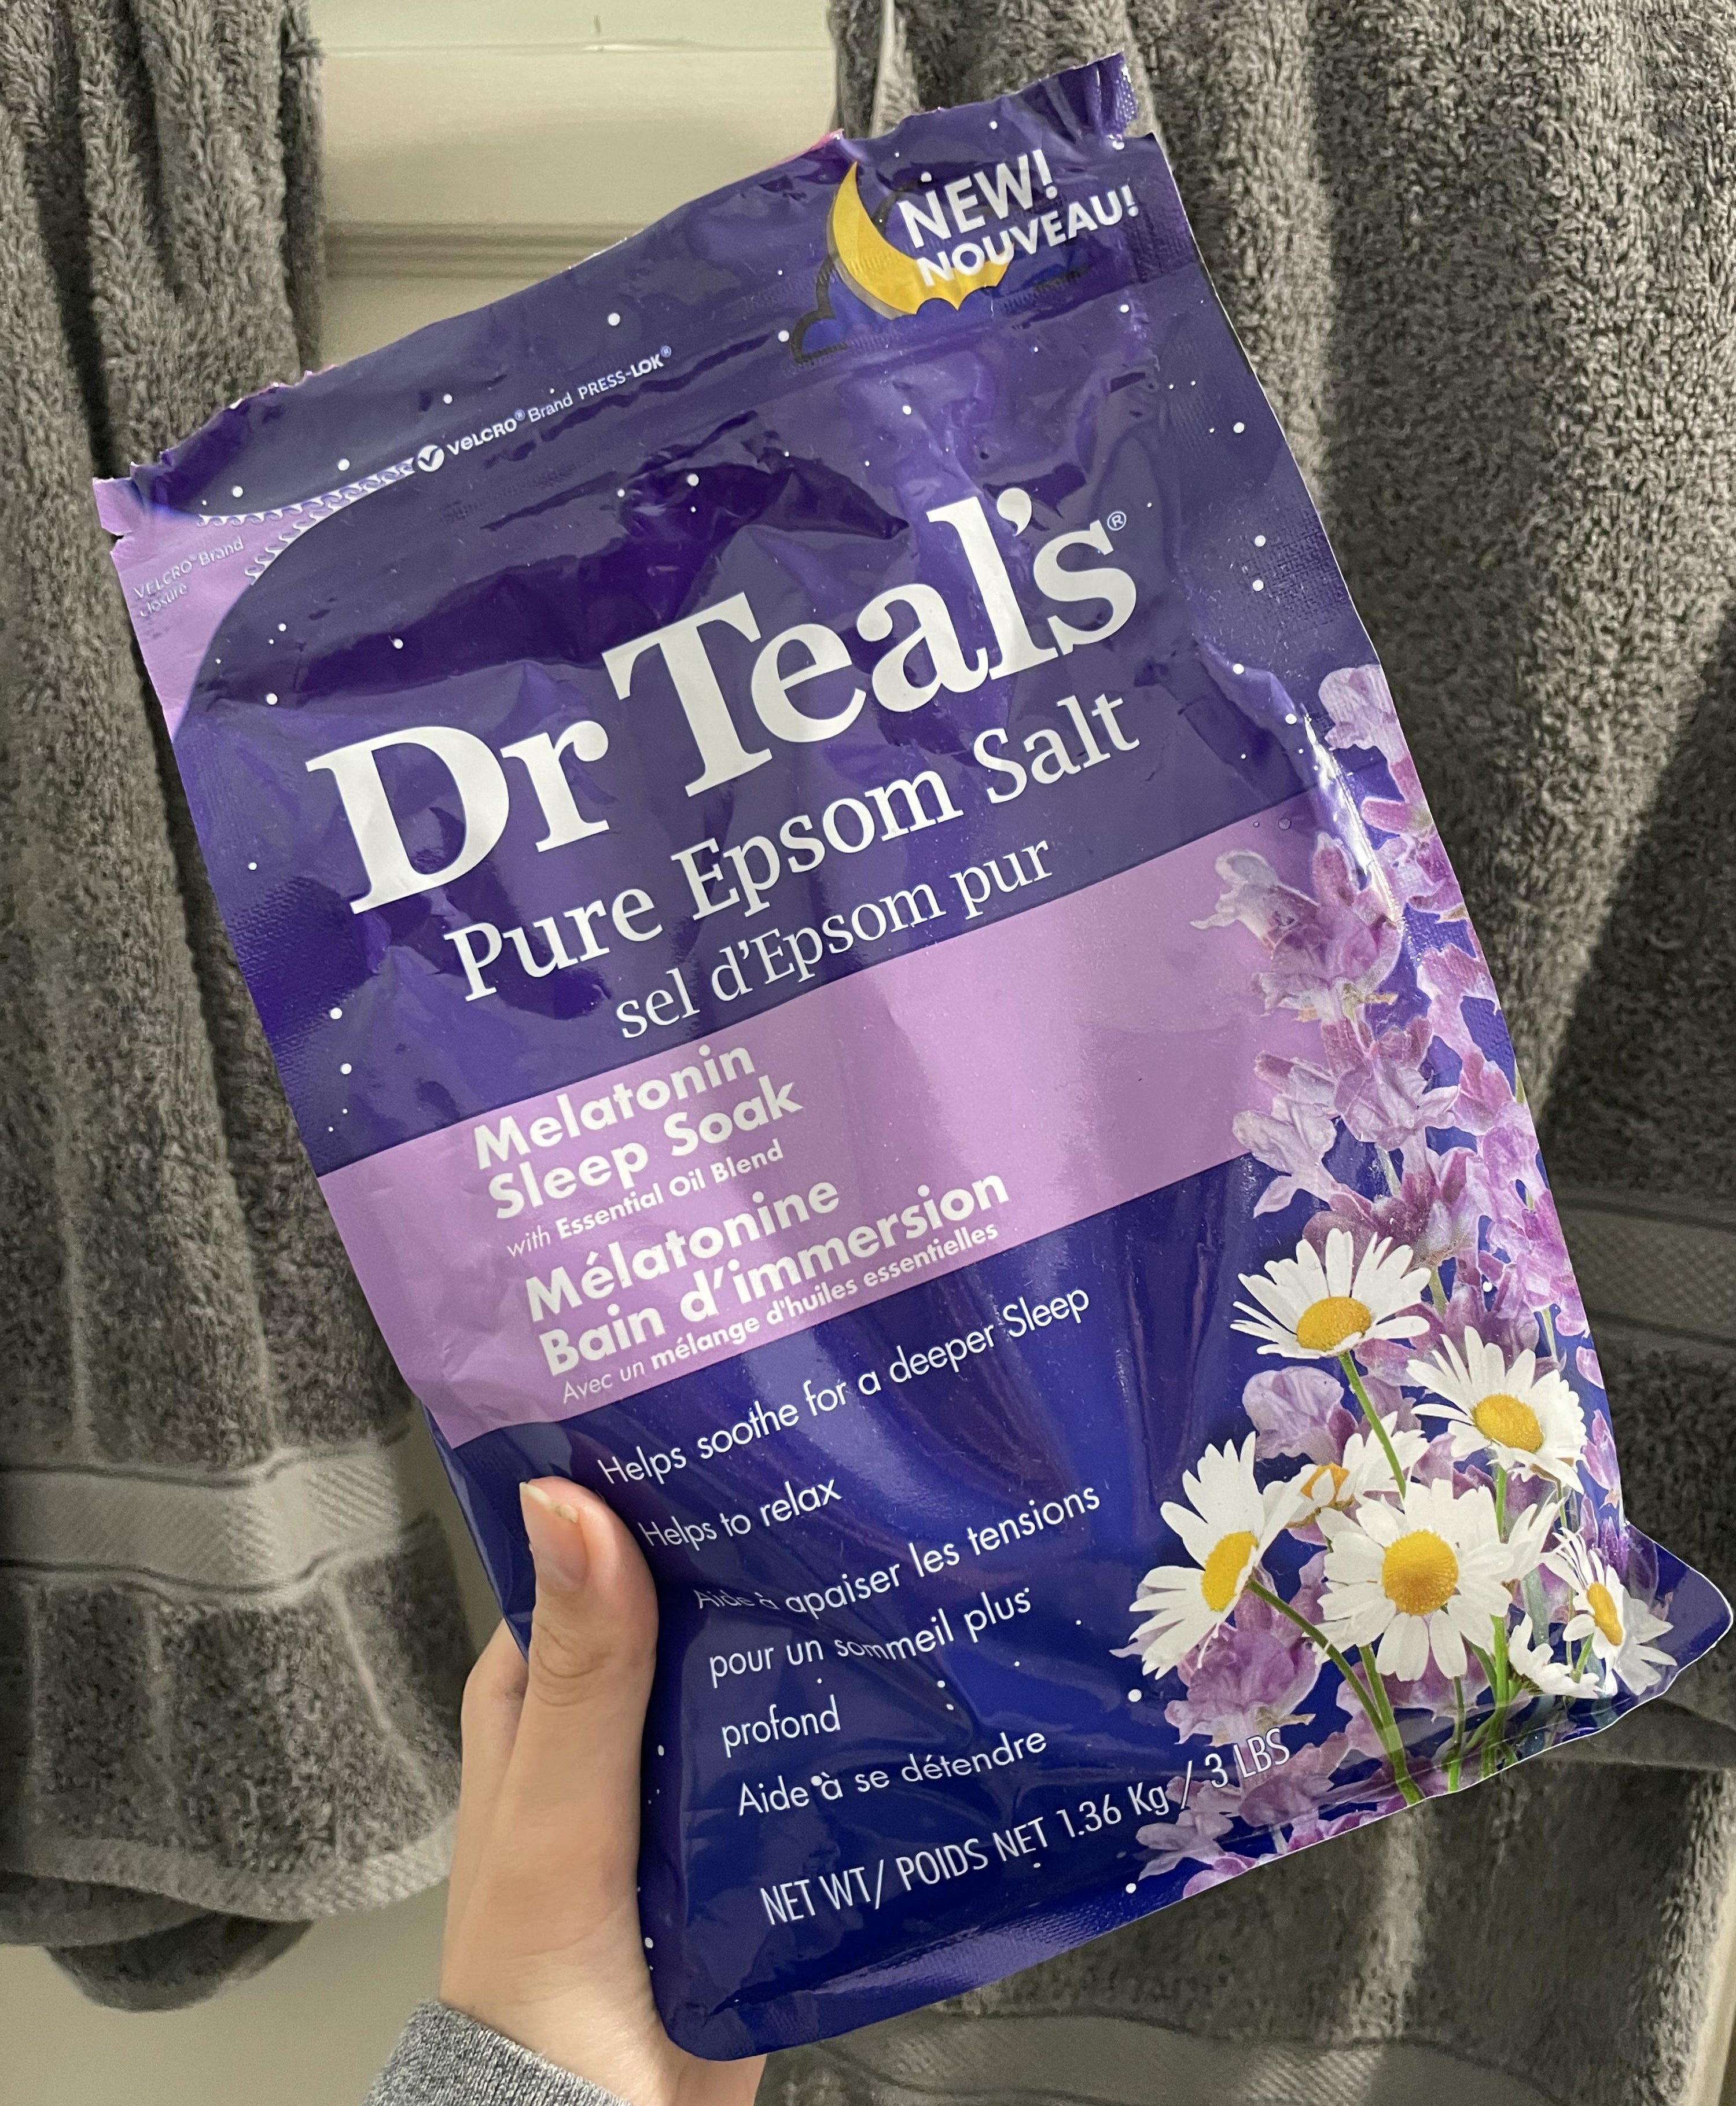 A person holding the bag of Epsom salts in front of towels